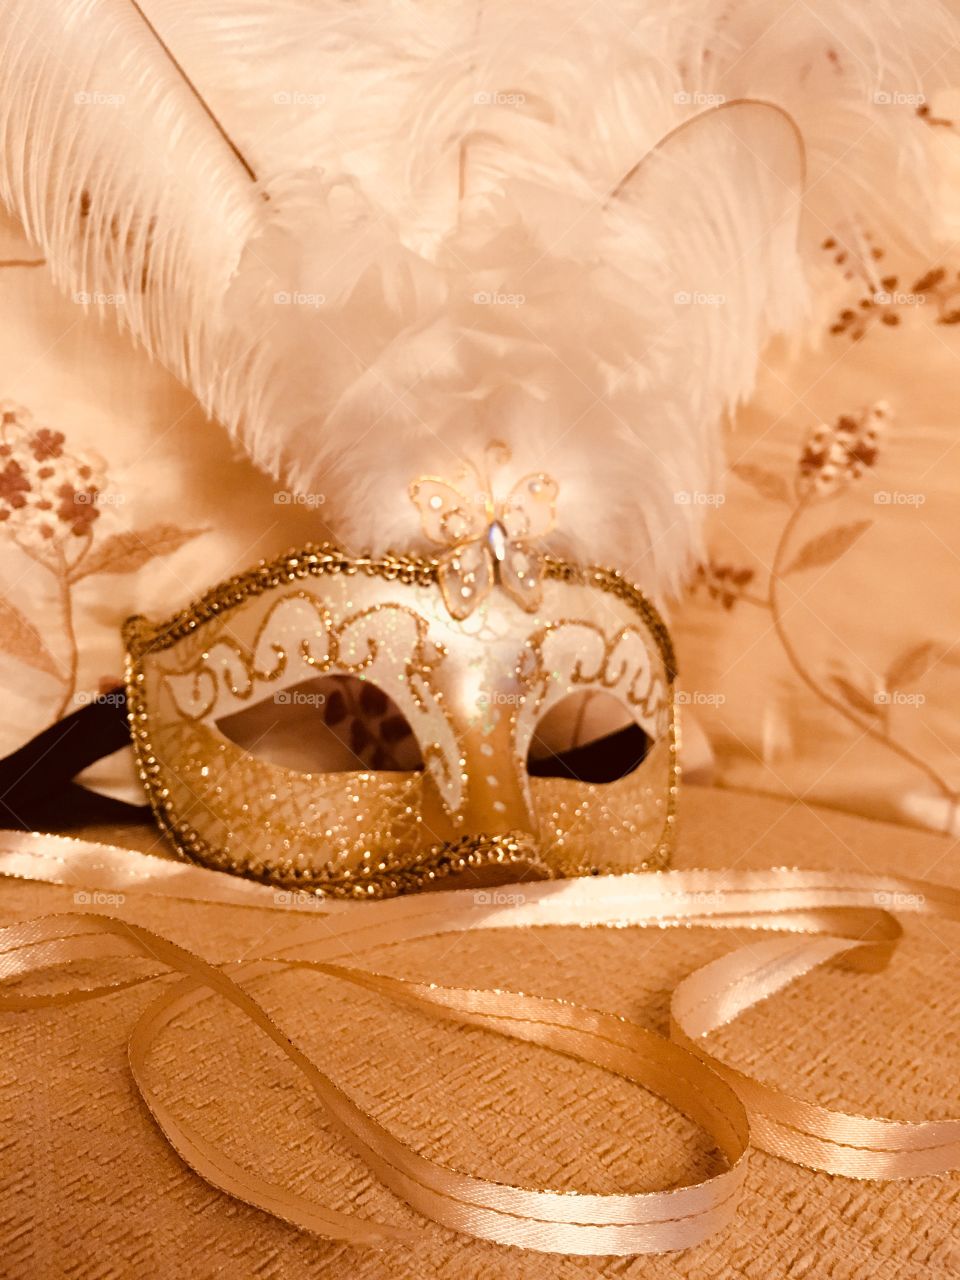 Gold Venetian masquerade mask with white feathers and gold ribbon swirled in the foreground 